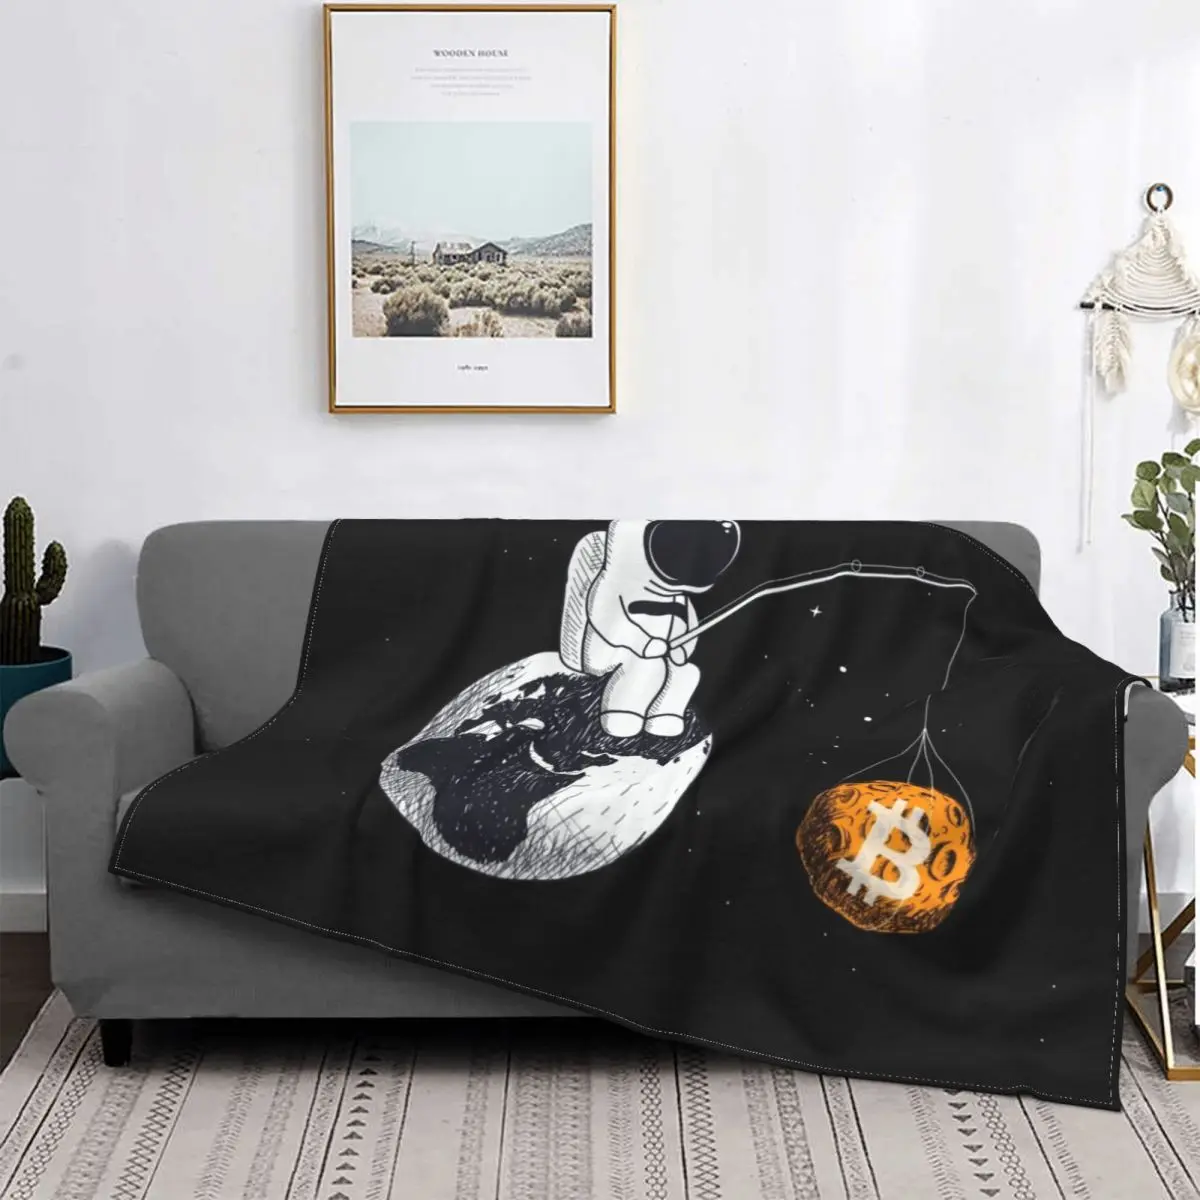 

Throw Blanket Soft Cozy Warm BTC Cryptocurrency Home Bedroom Sofa Couch Bed Kids Adults Travel Camping Bitcoin Pattern Flannel